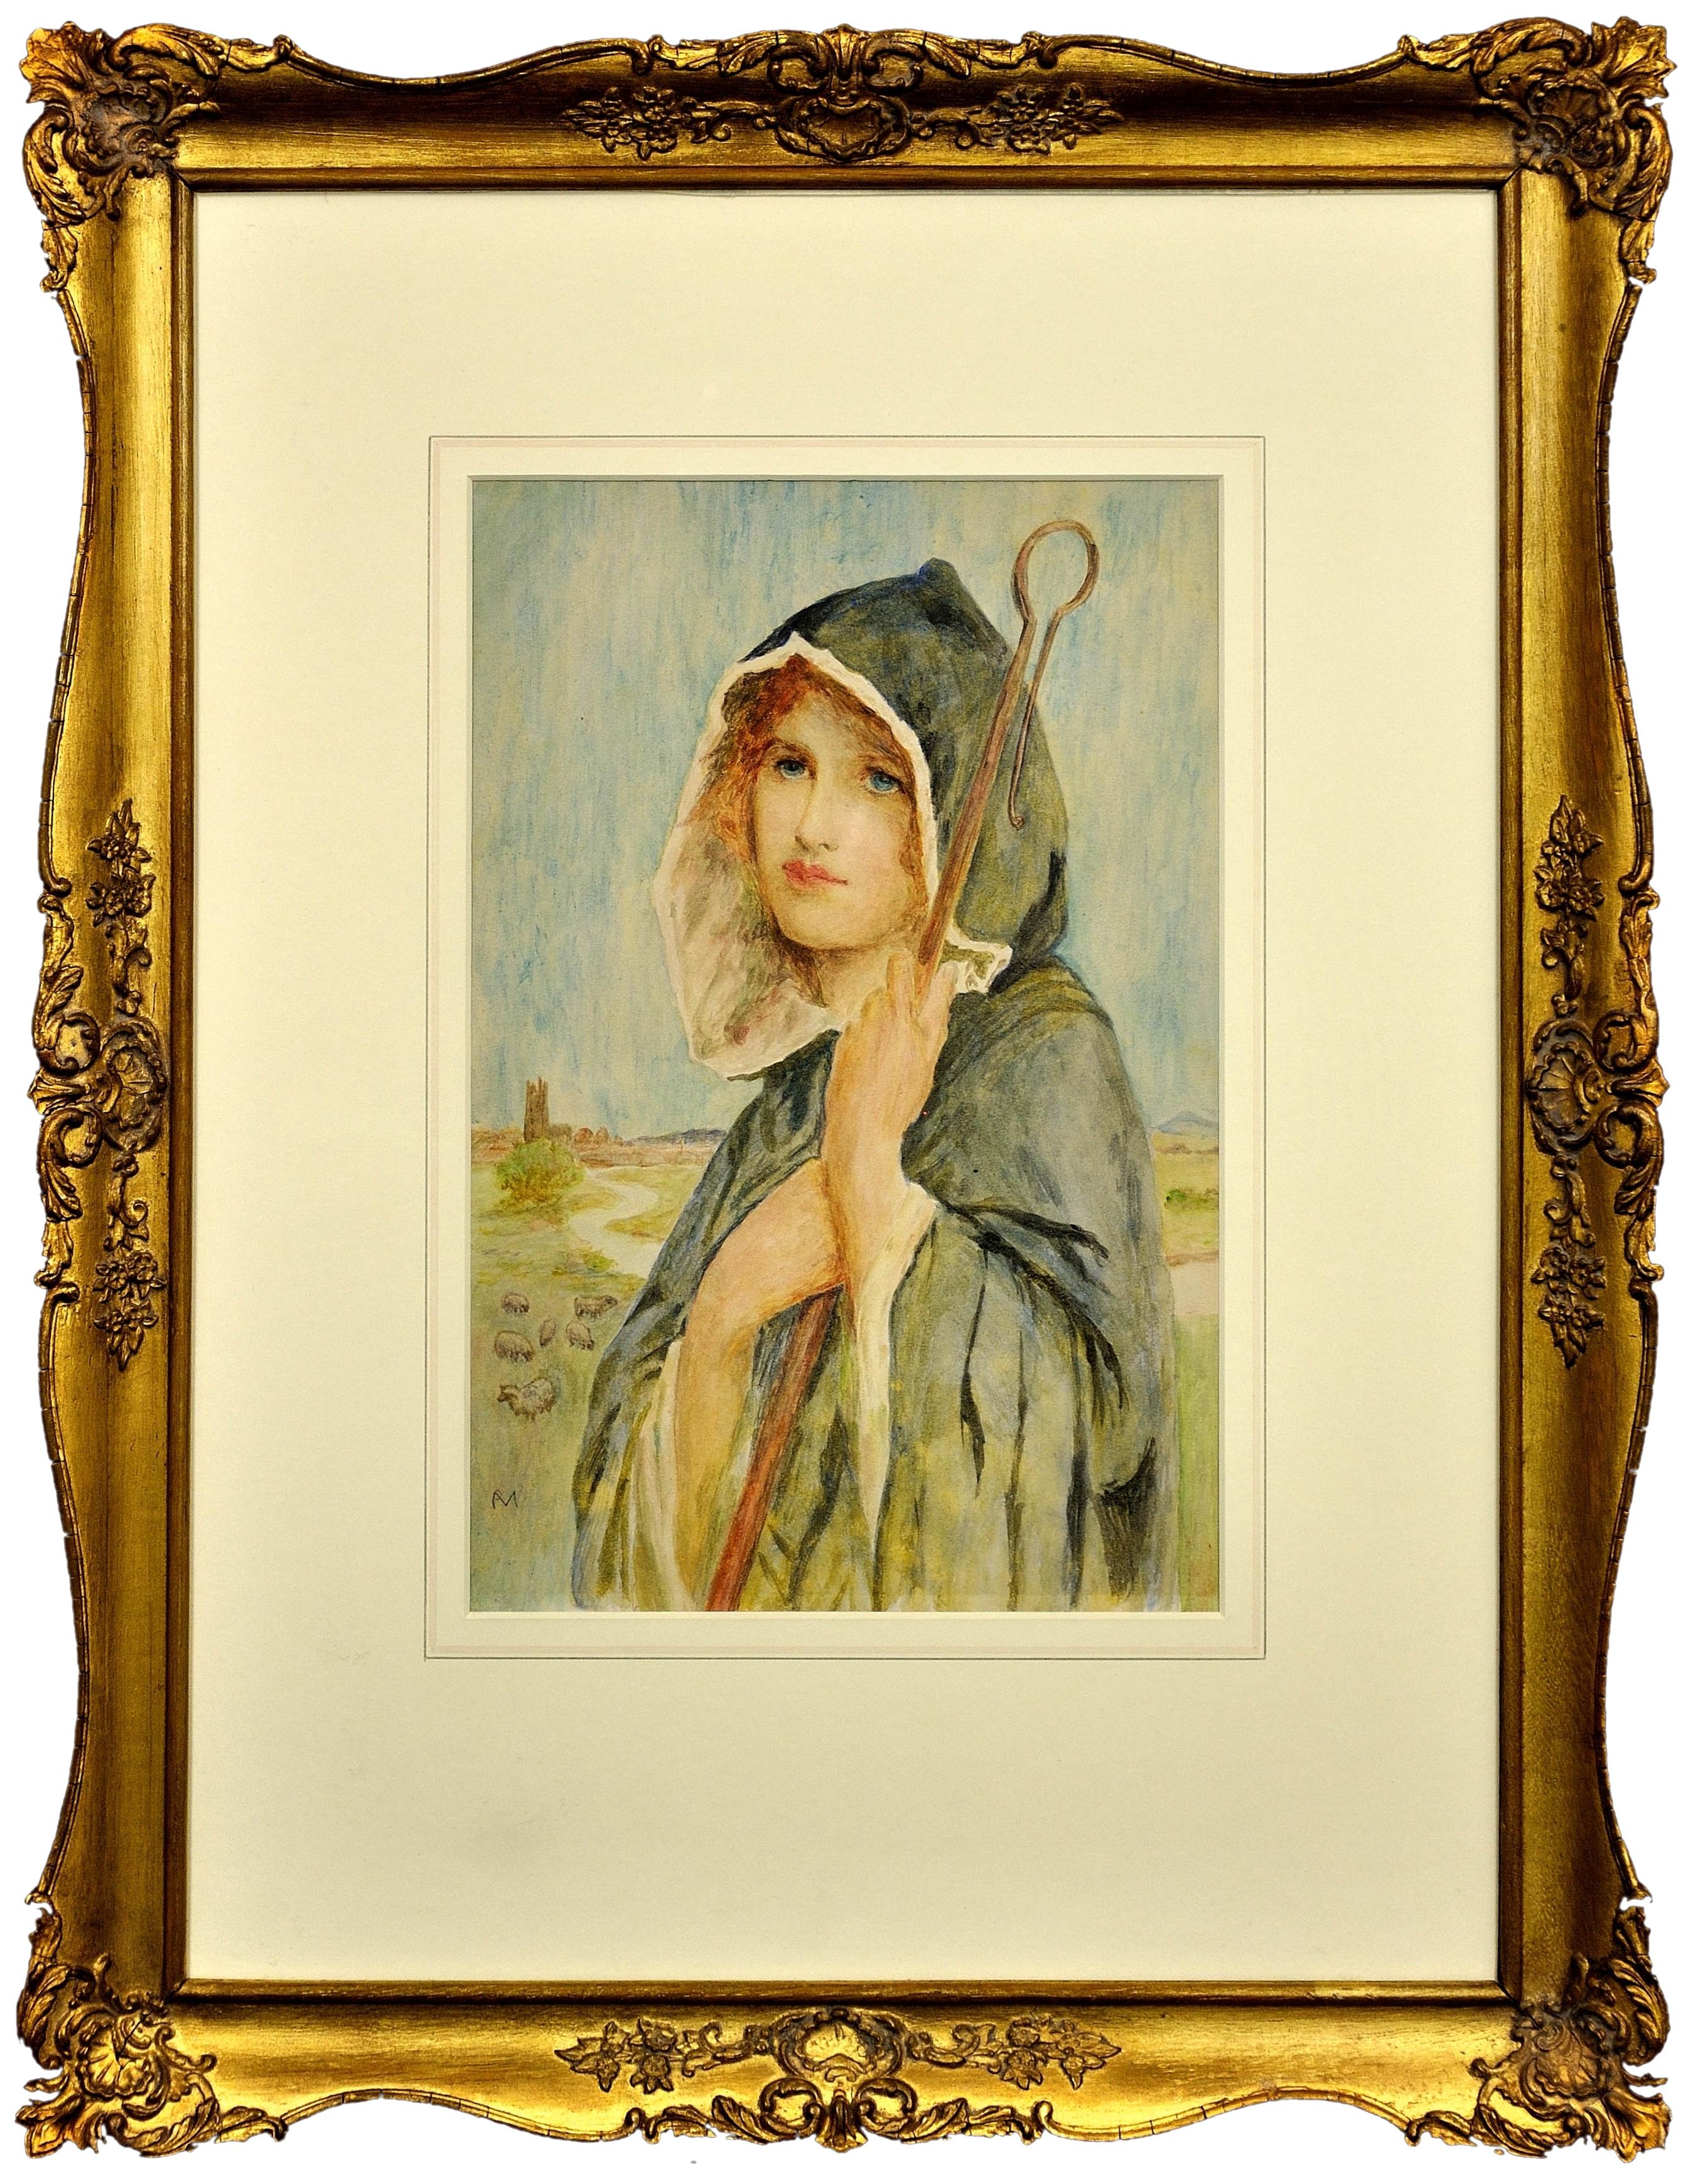 The Cloaked Shepherdess. Pre-Raphaelite. Arts and Crafts Aesthetics. Victorian.